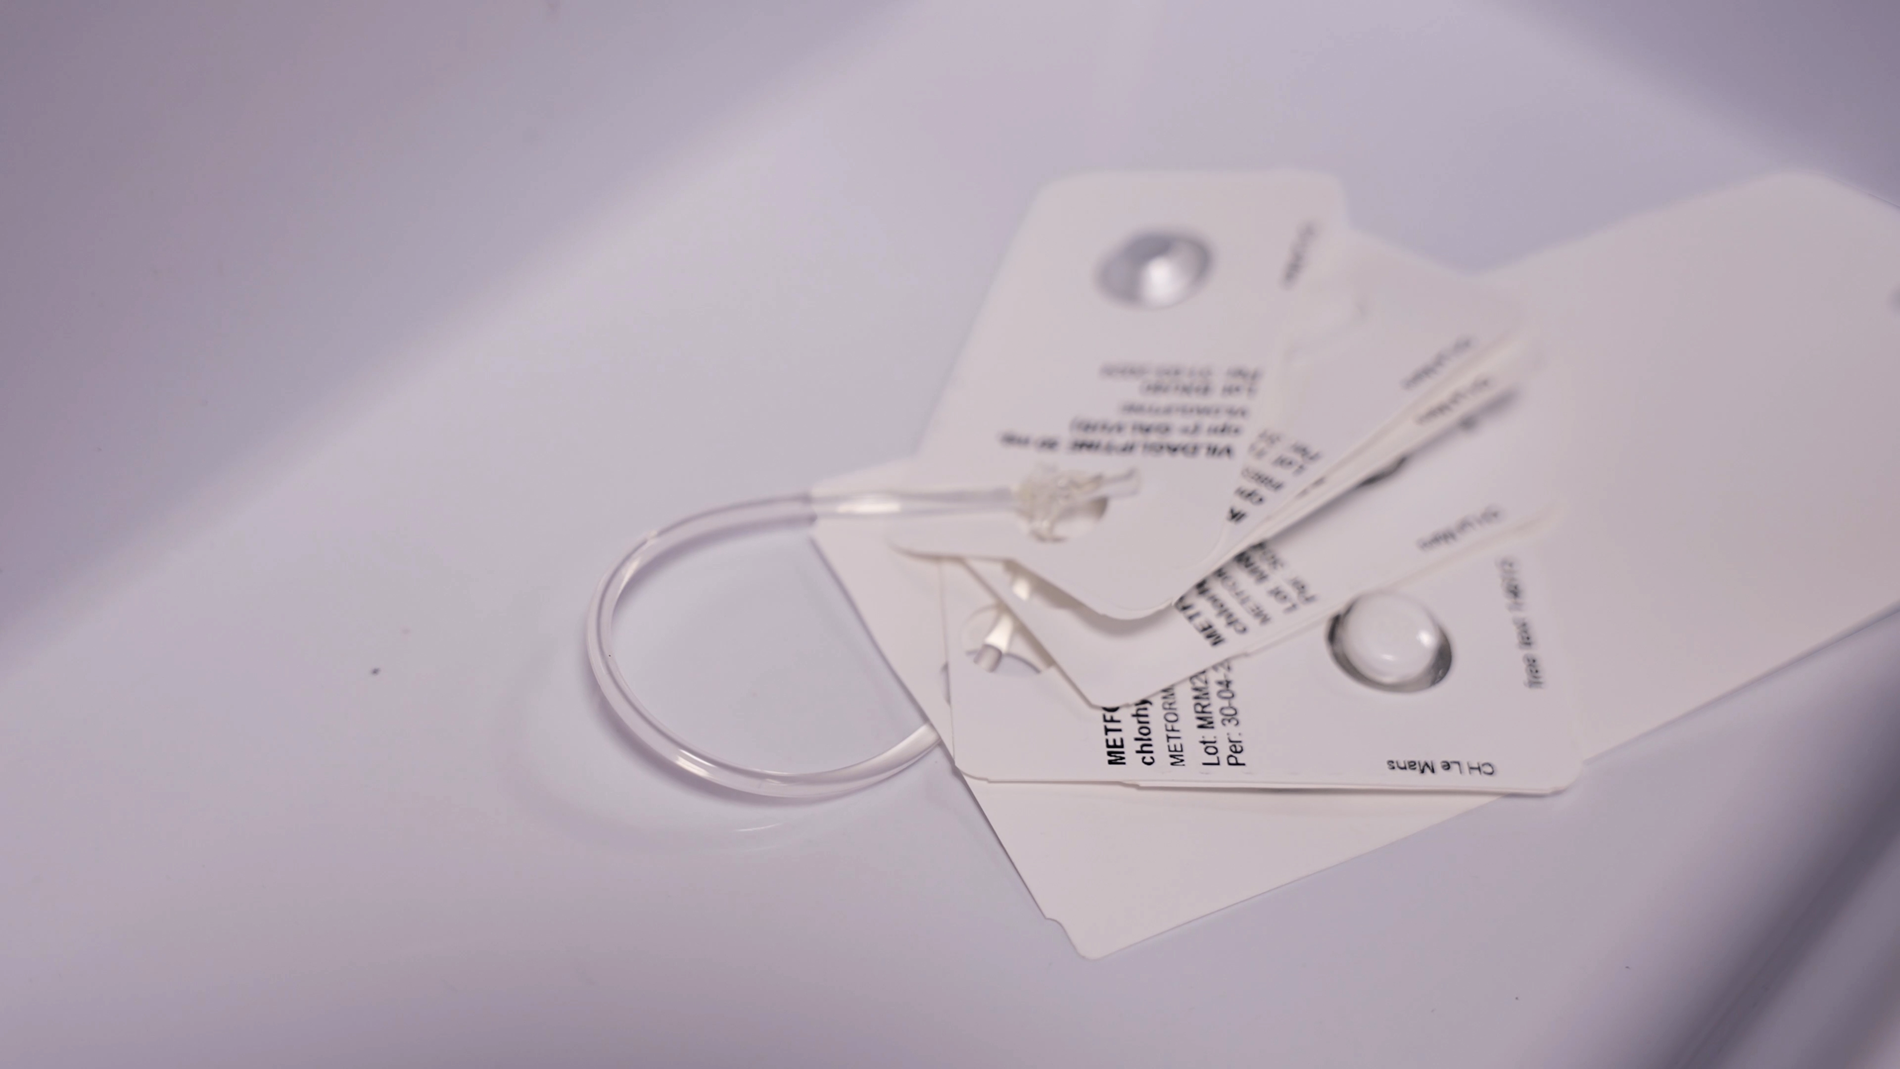 The Swisslog Healthcare Unit Dose Ring ensures the right medication at the right time.